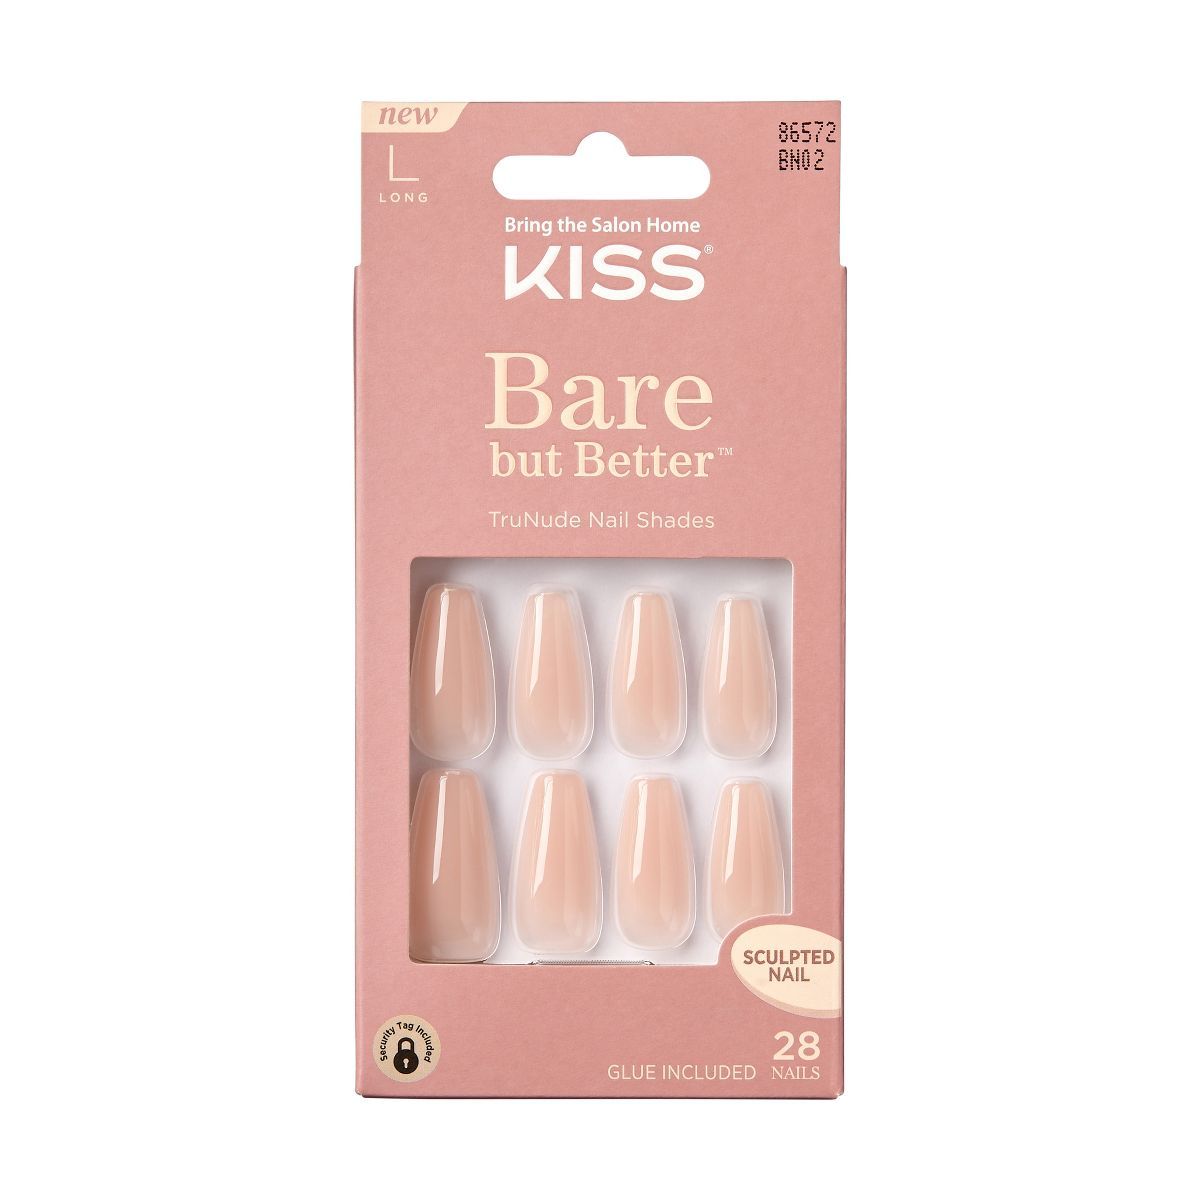 KISS Bare But Better TruNude Fake Nails - Nude Drama - 28ct | Target